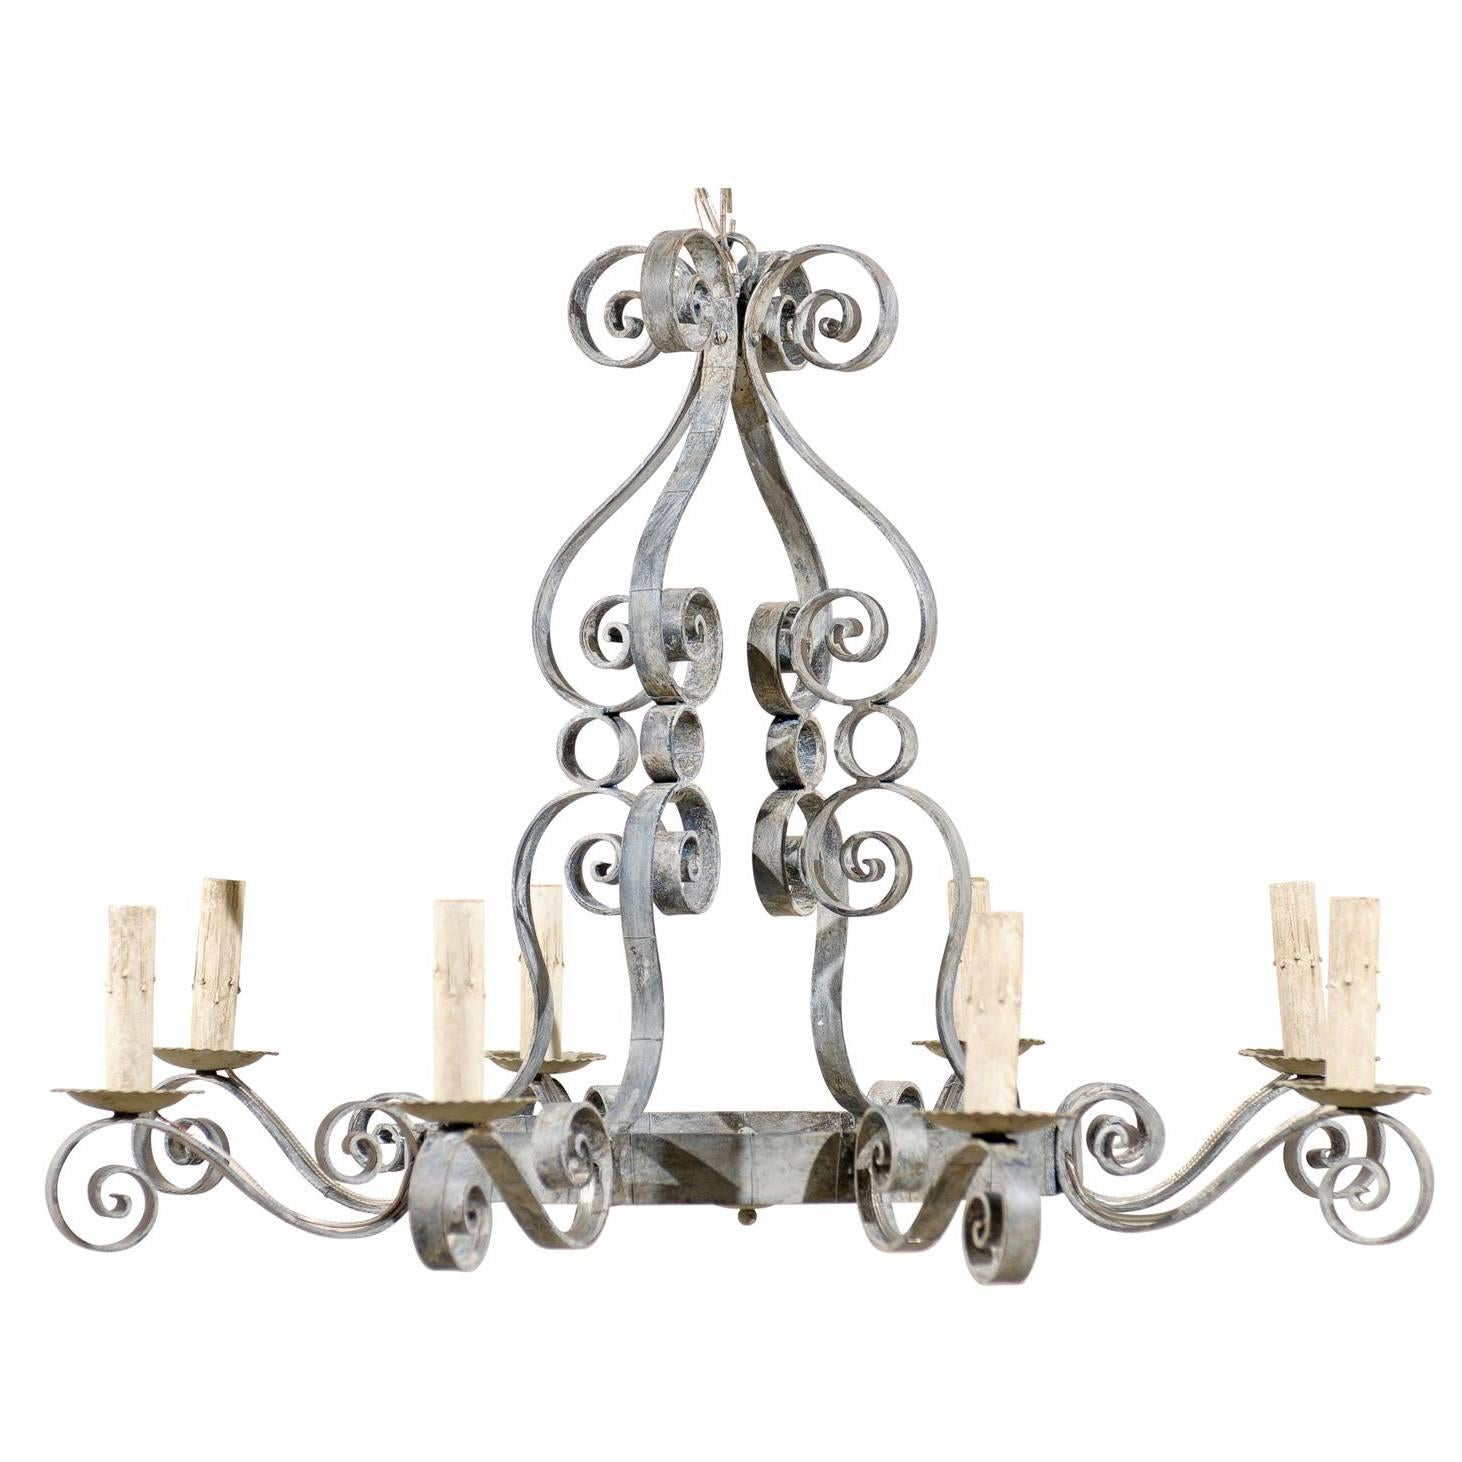 French Vintage Eight-Light Painted Iron Chandelier with S-Scrolls Throughout